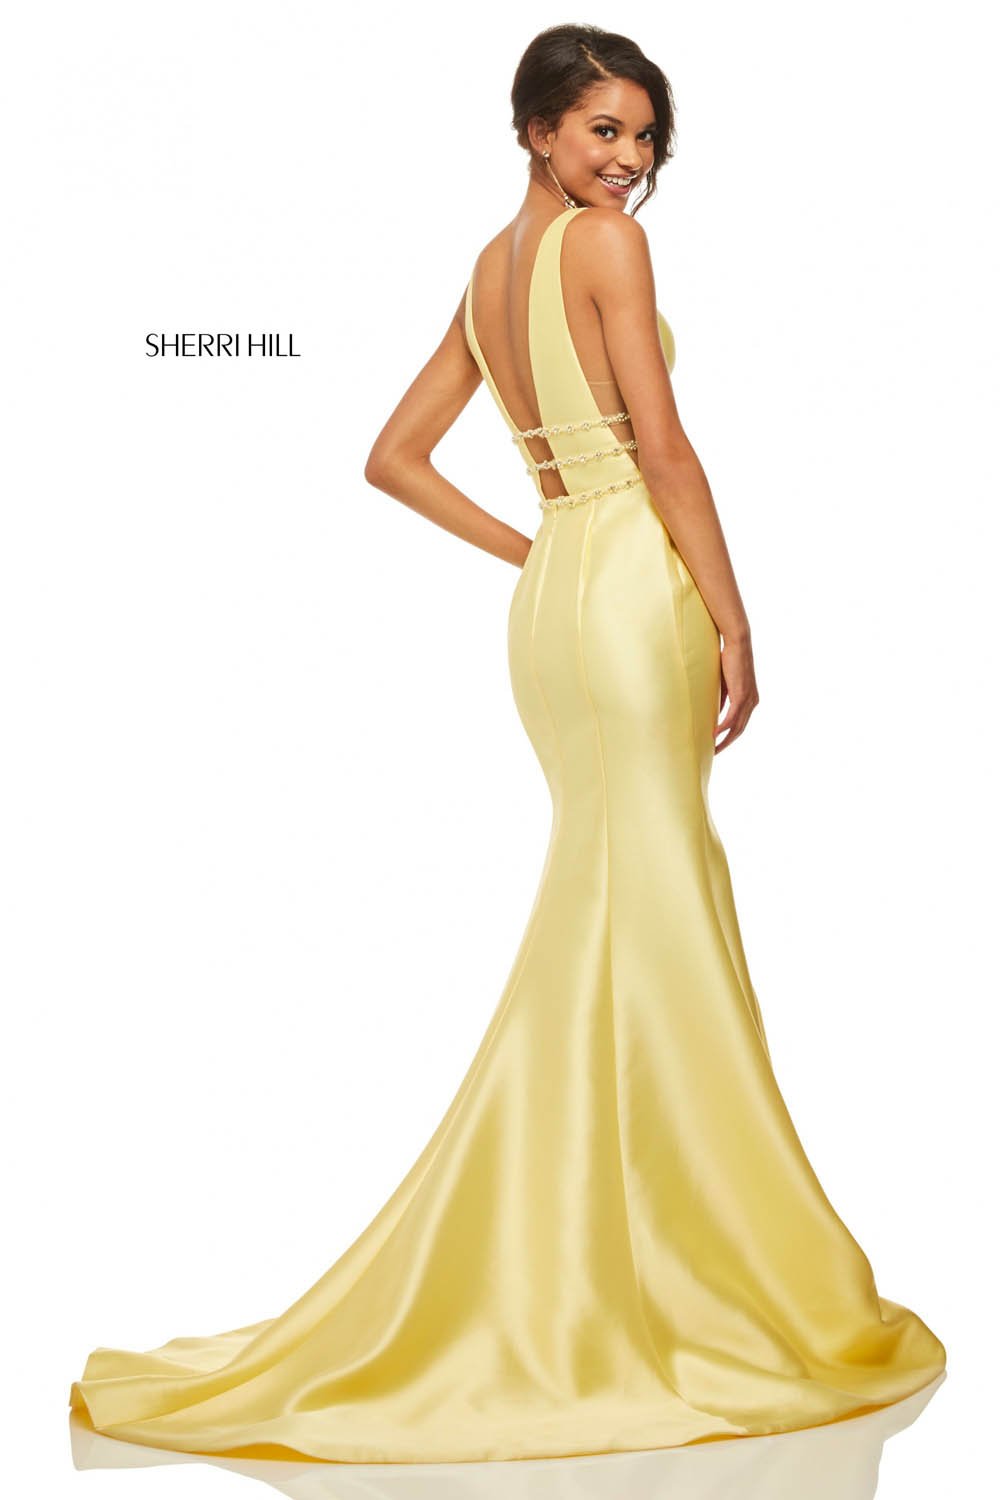 Sherri Hill 52576 dress images in these colors: Yellow, Lilac.